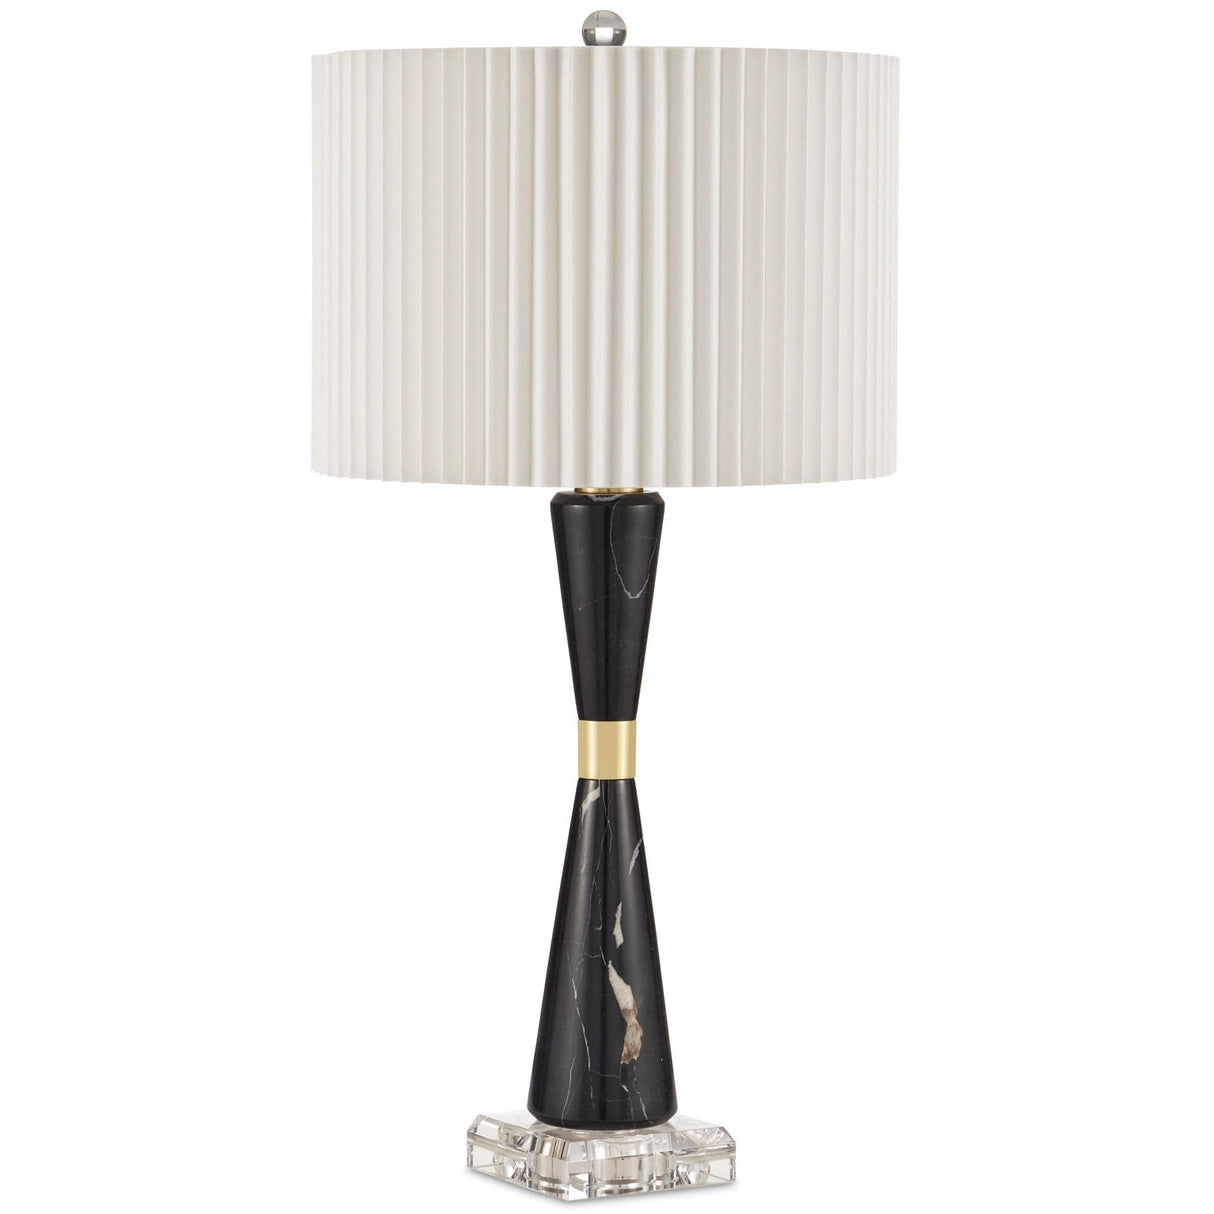 Currey & Company Edelmar Table Lamp Table Lamps currey-co-6000-0903 633306055971